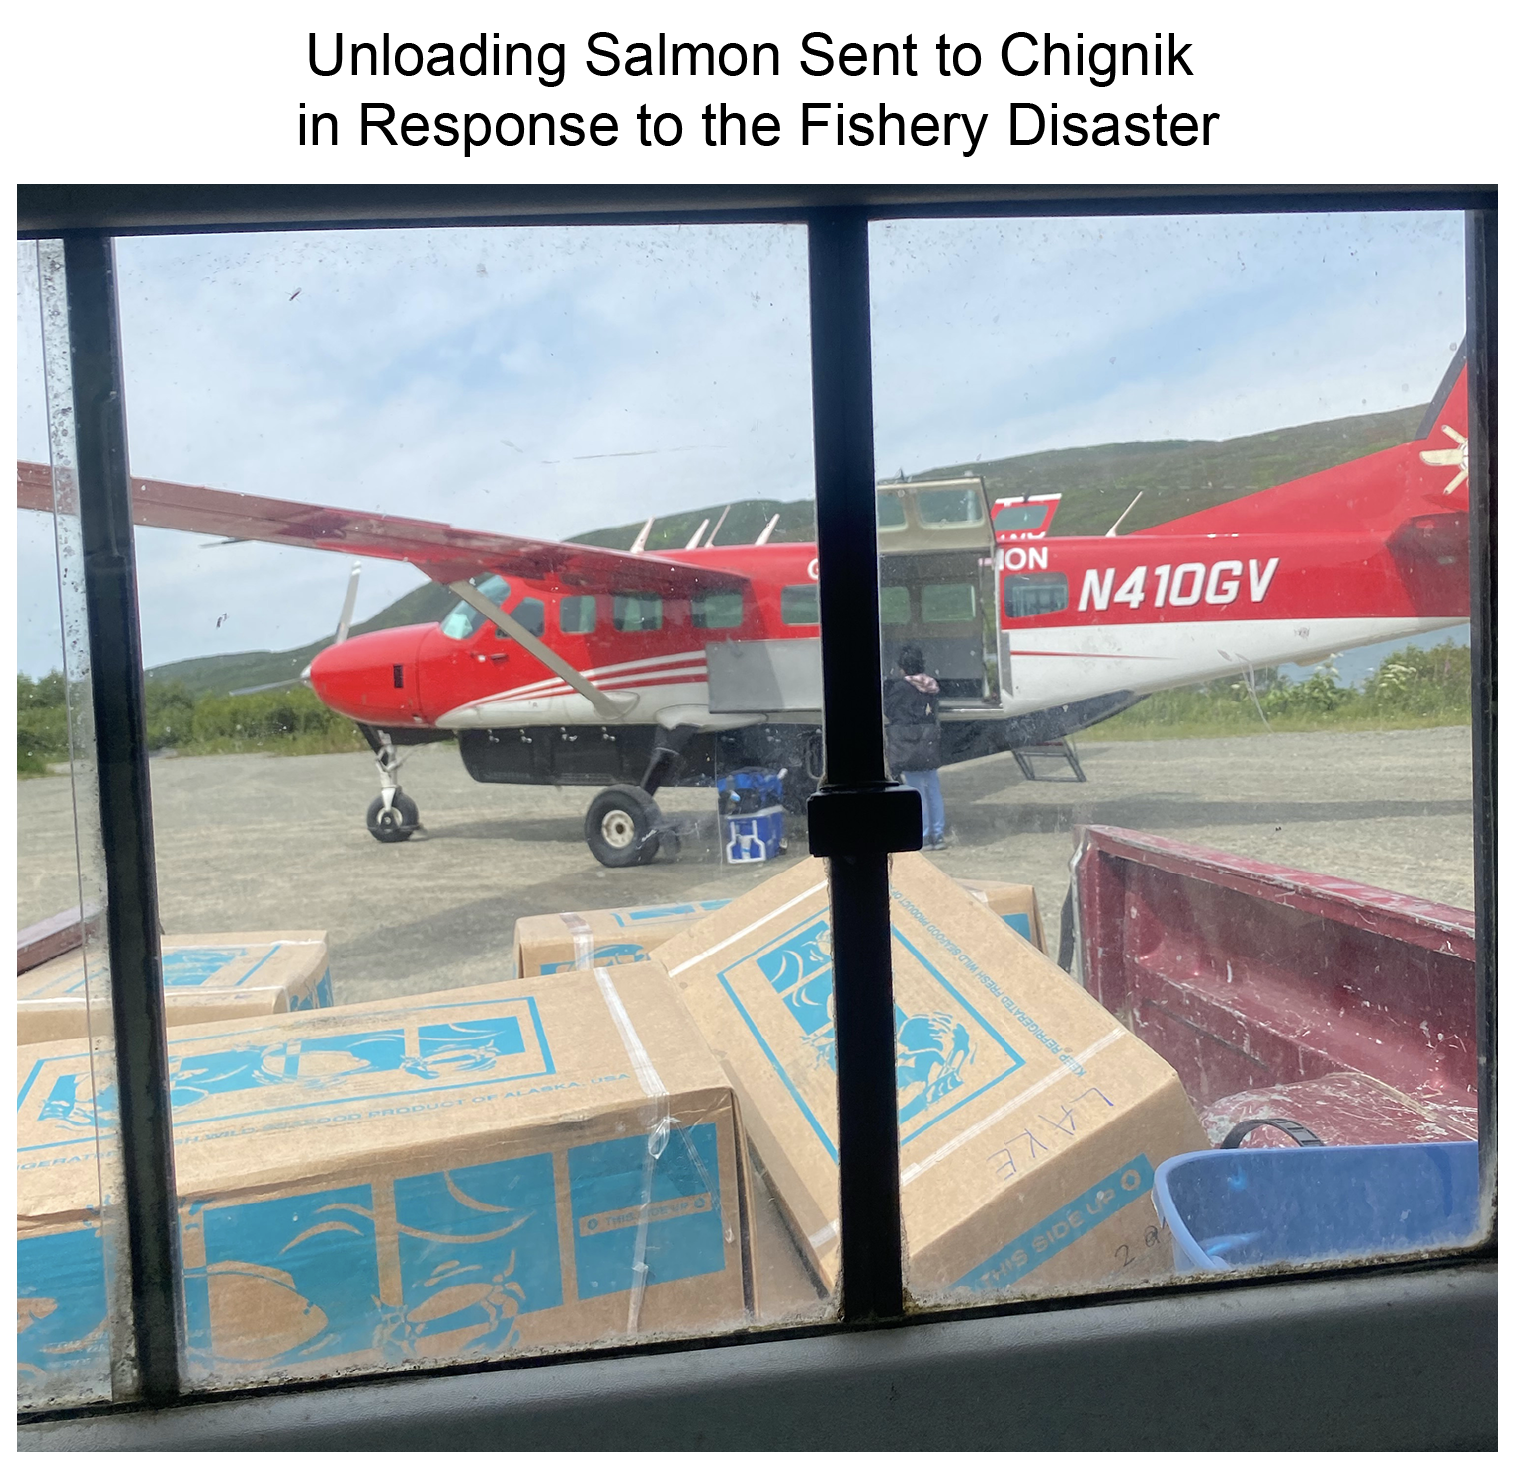 Unloading Salmon Sent to Chignik in Response to the Fishery Disaster